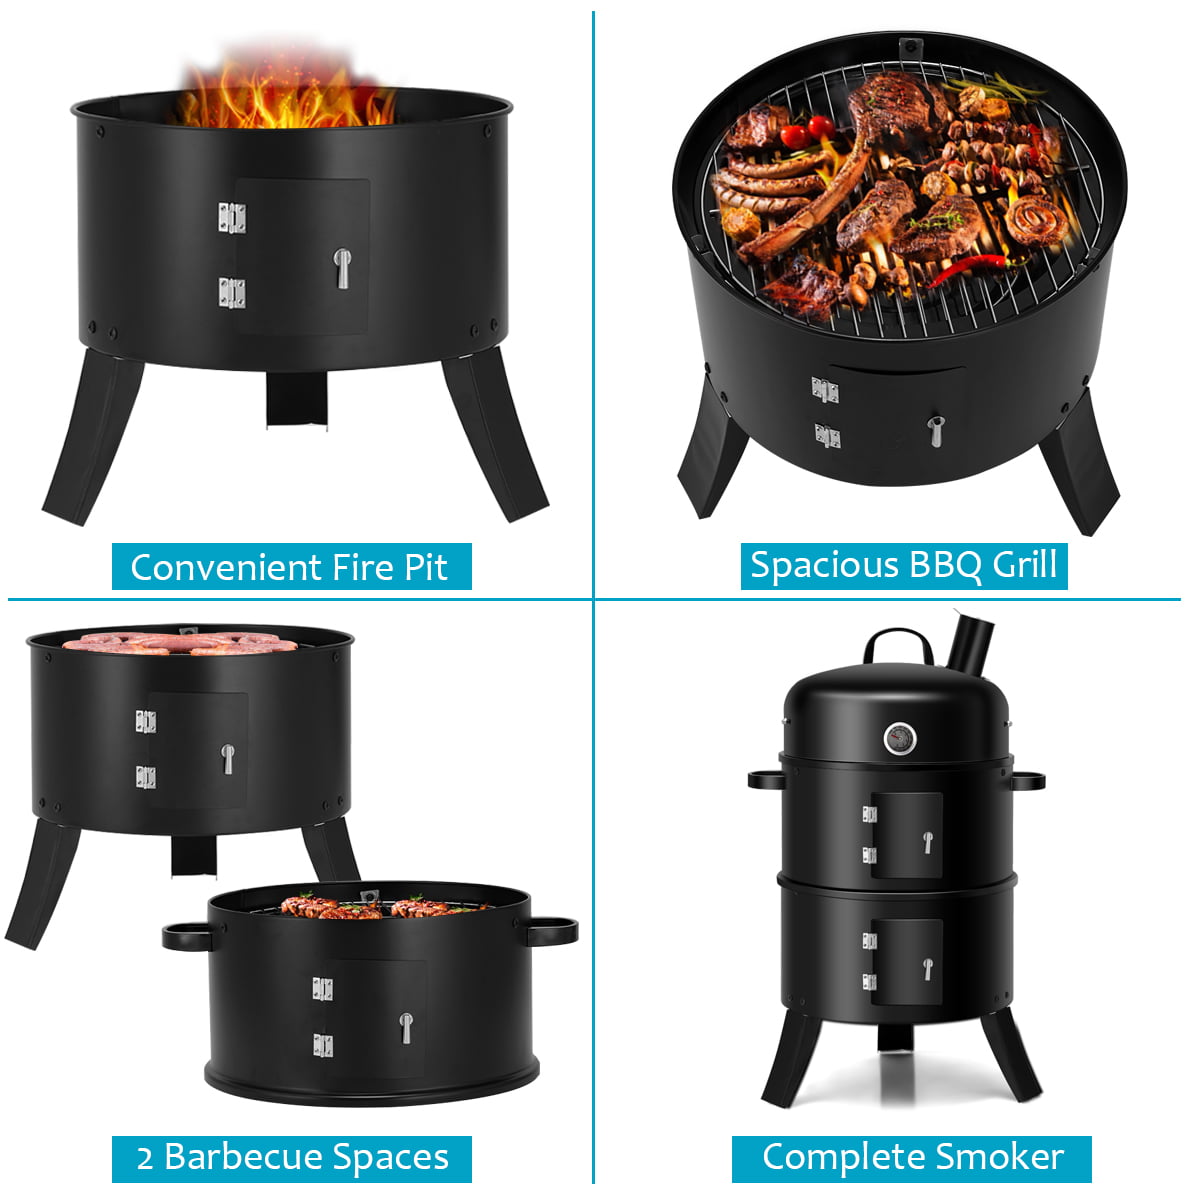 Costway 3-in-1 Portable Round Charcoal Smoker Vertical BBQ Grill 